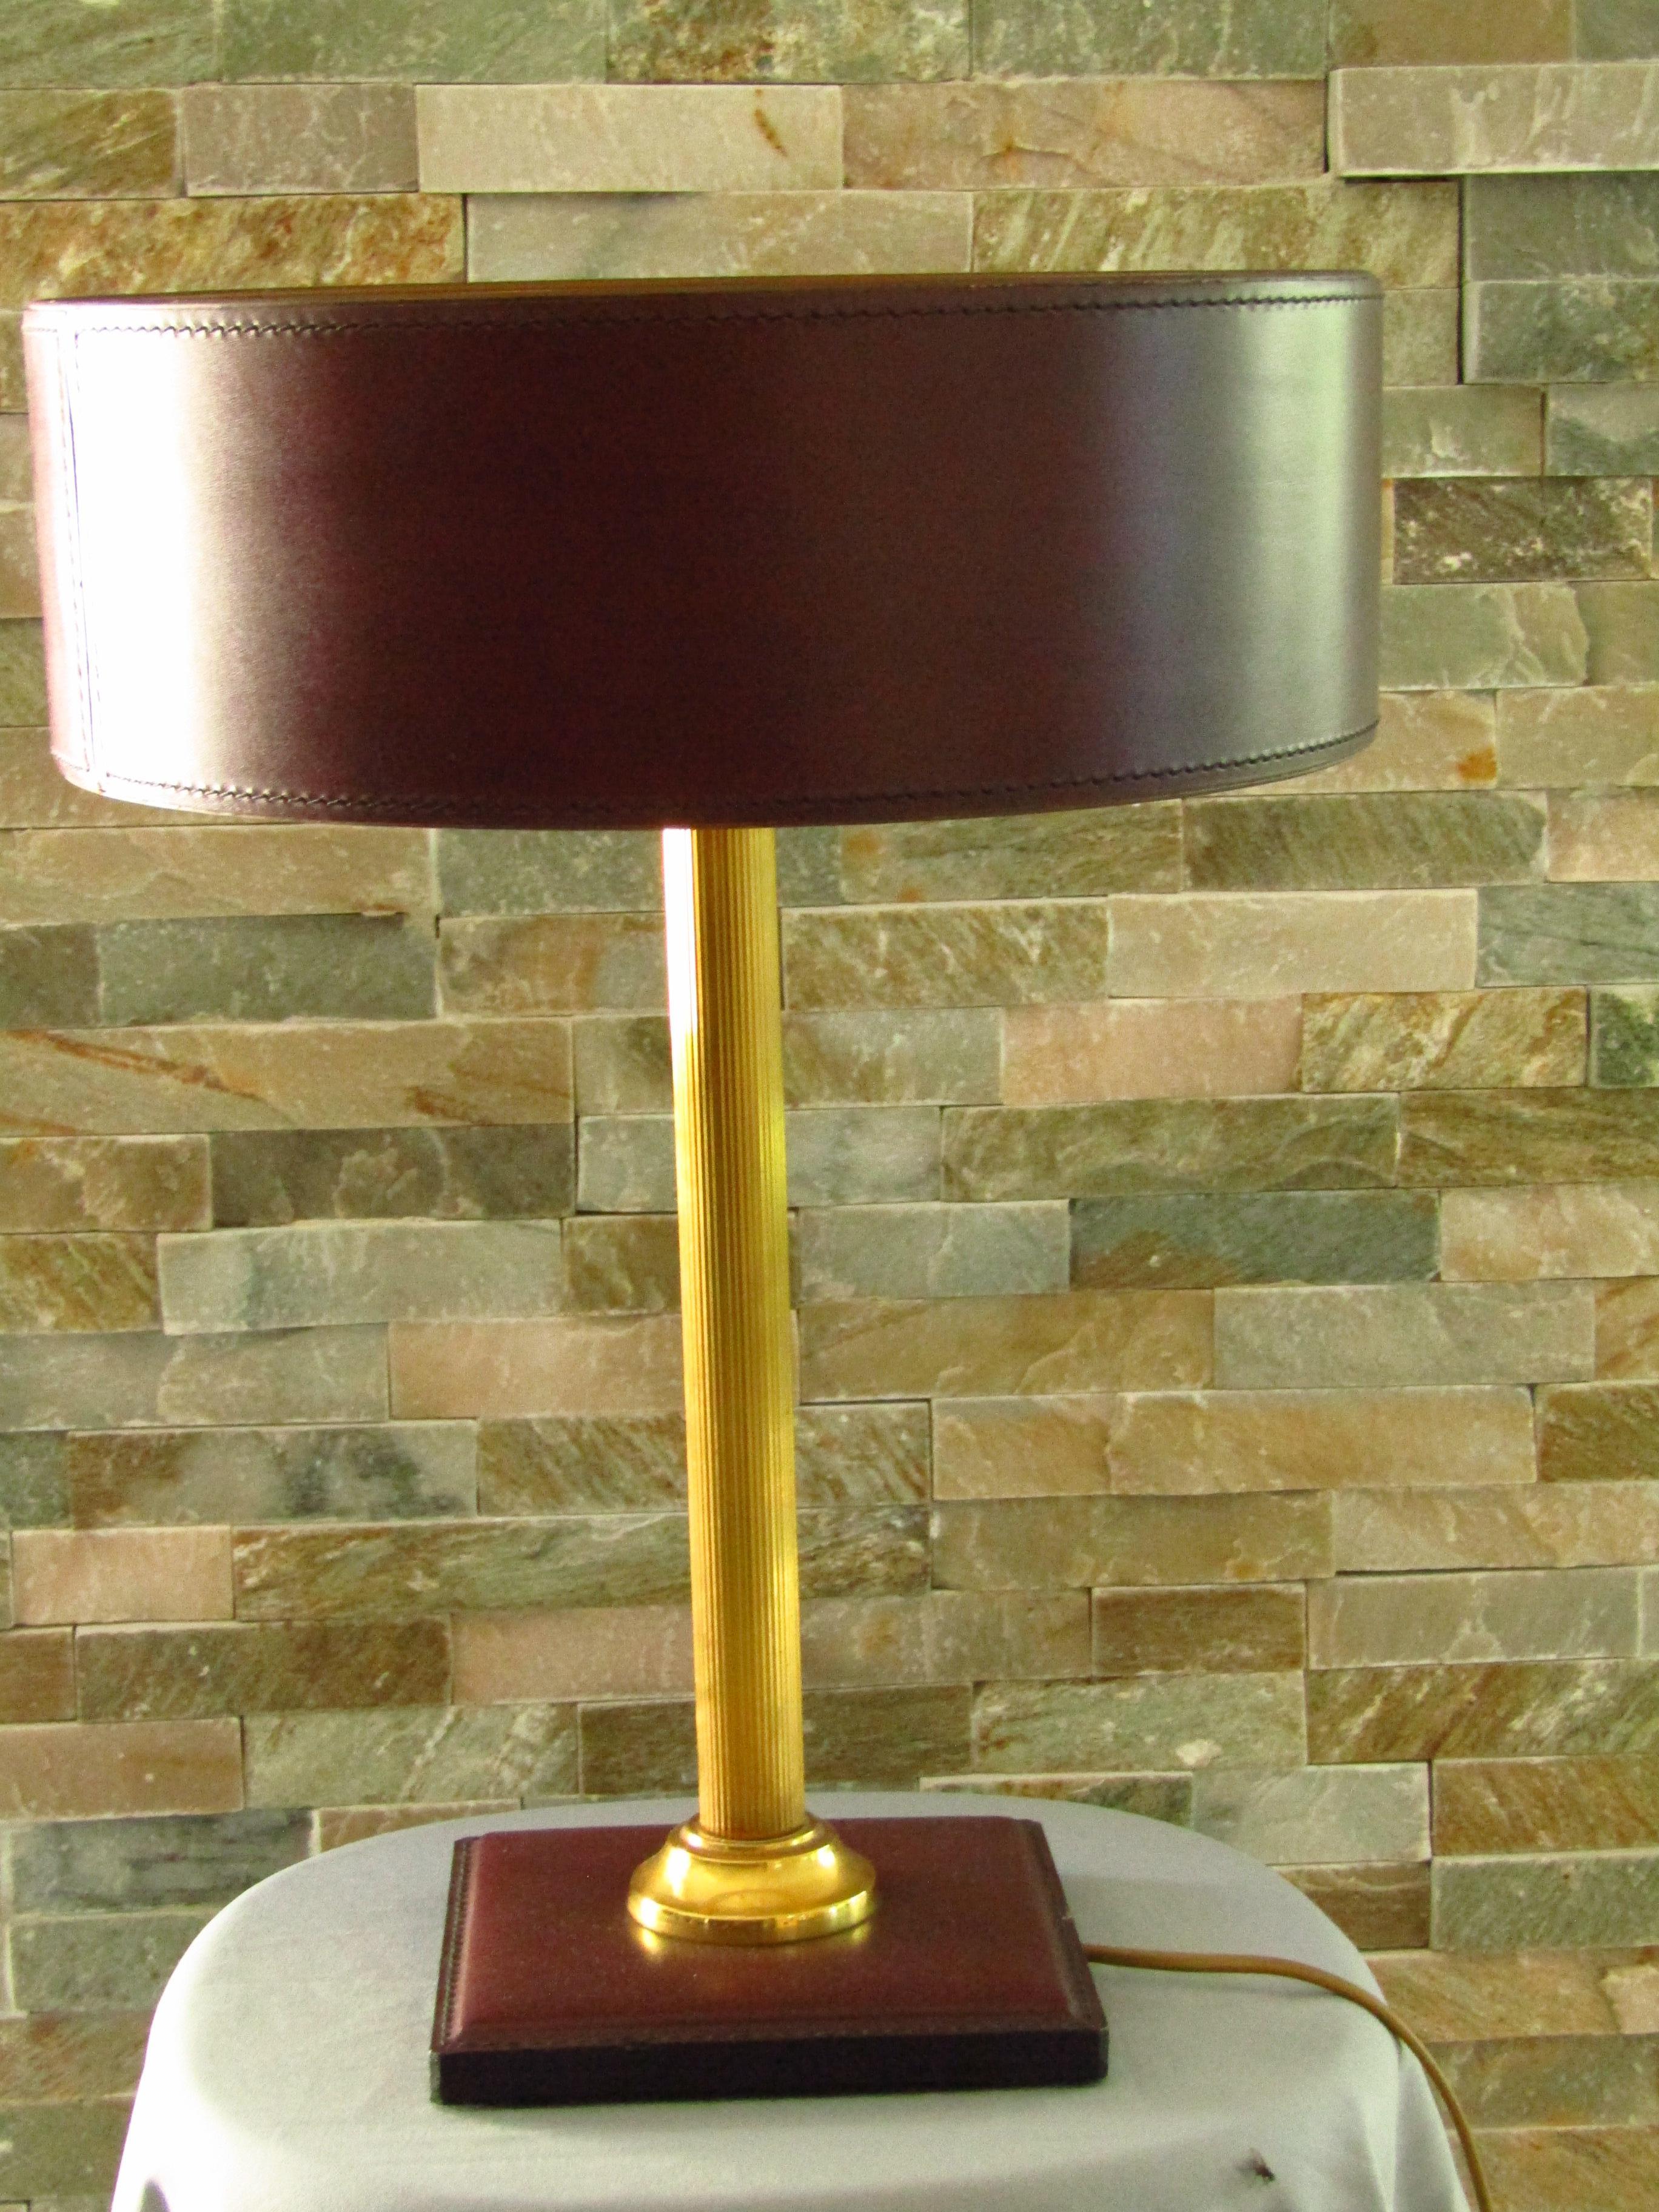 Mid-Century Adnet desk lamp leather and brass. Published by Tanneur, France, circa 1958. Bordeaux colored leather, hand-stitched, interior gold.

Free shipping any where in the world for this item!